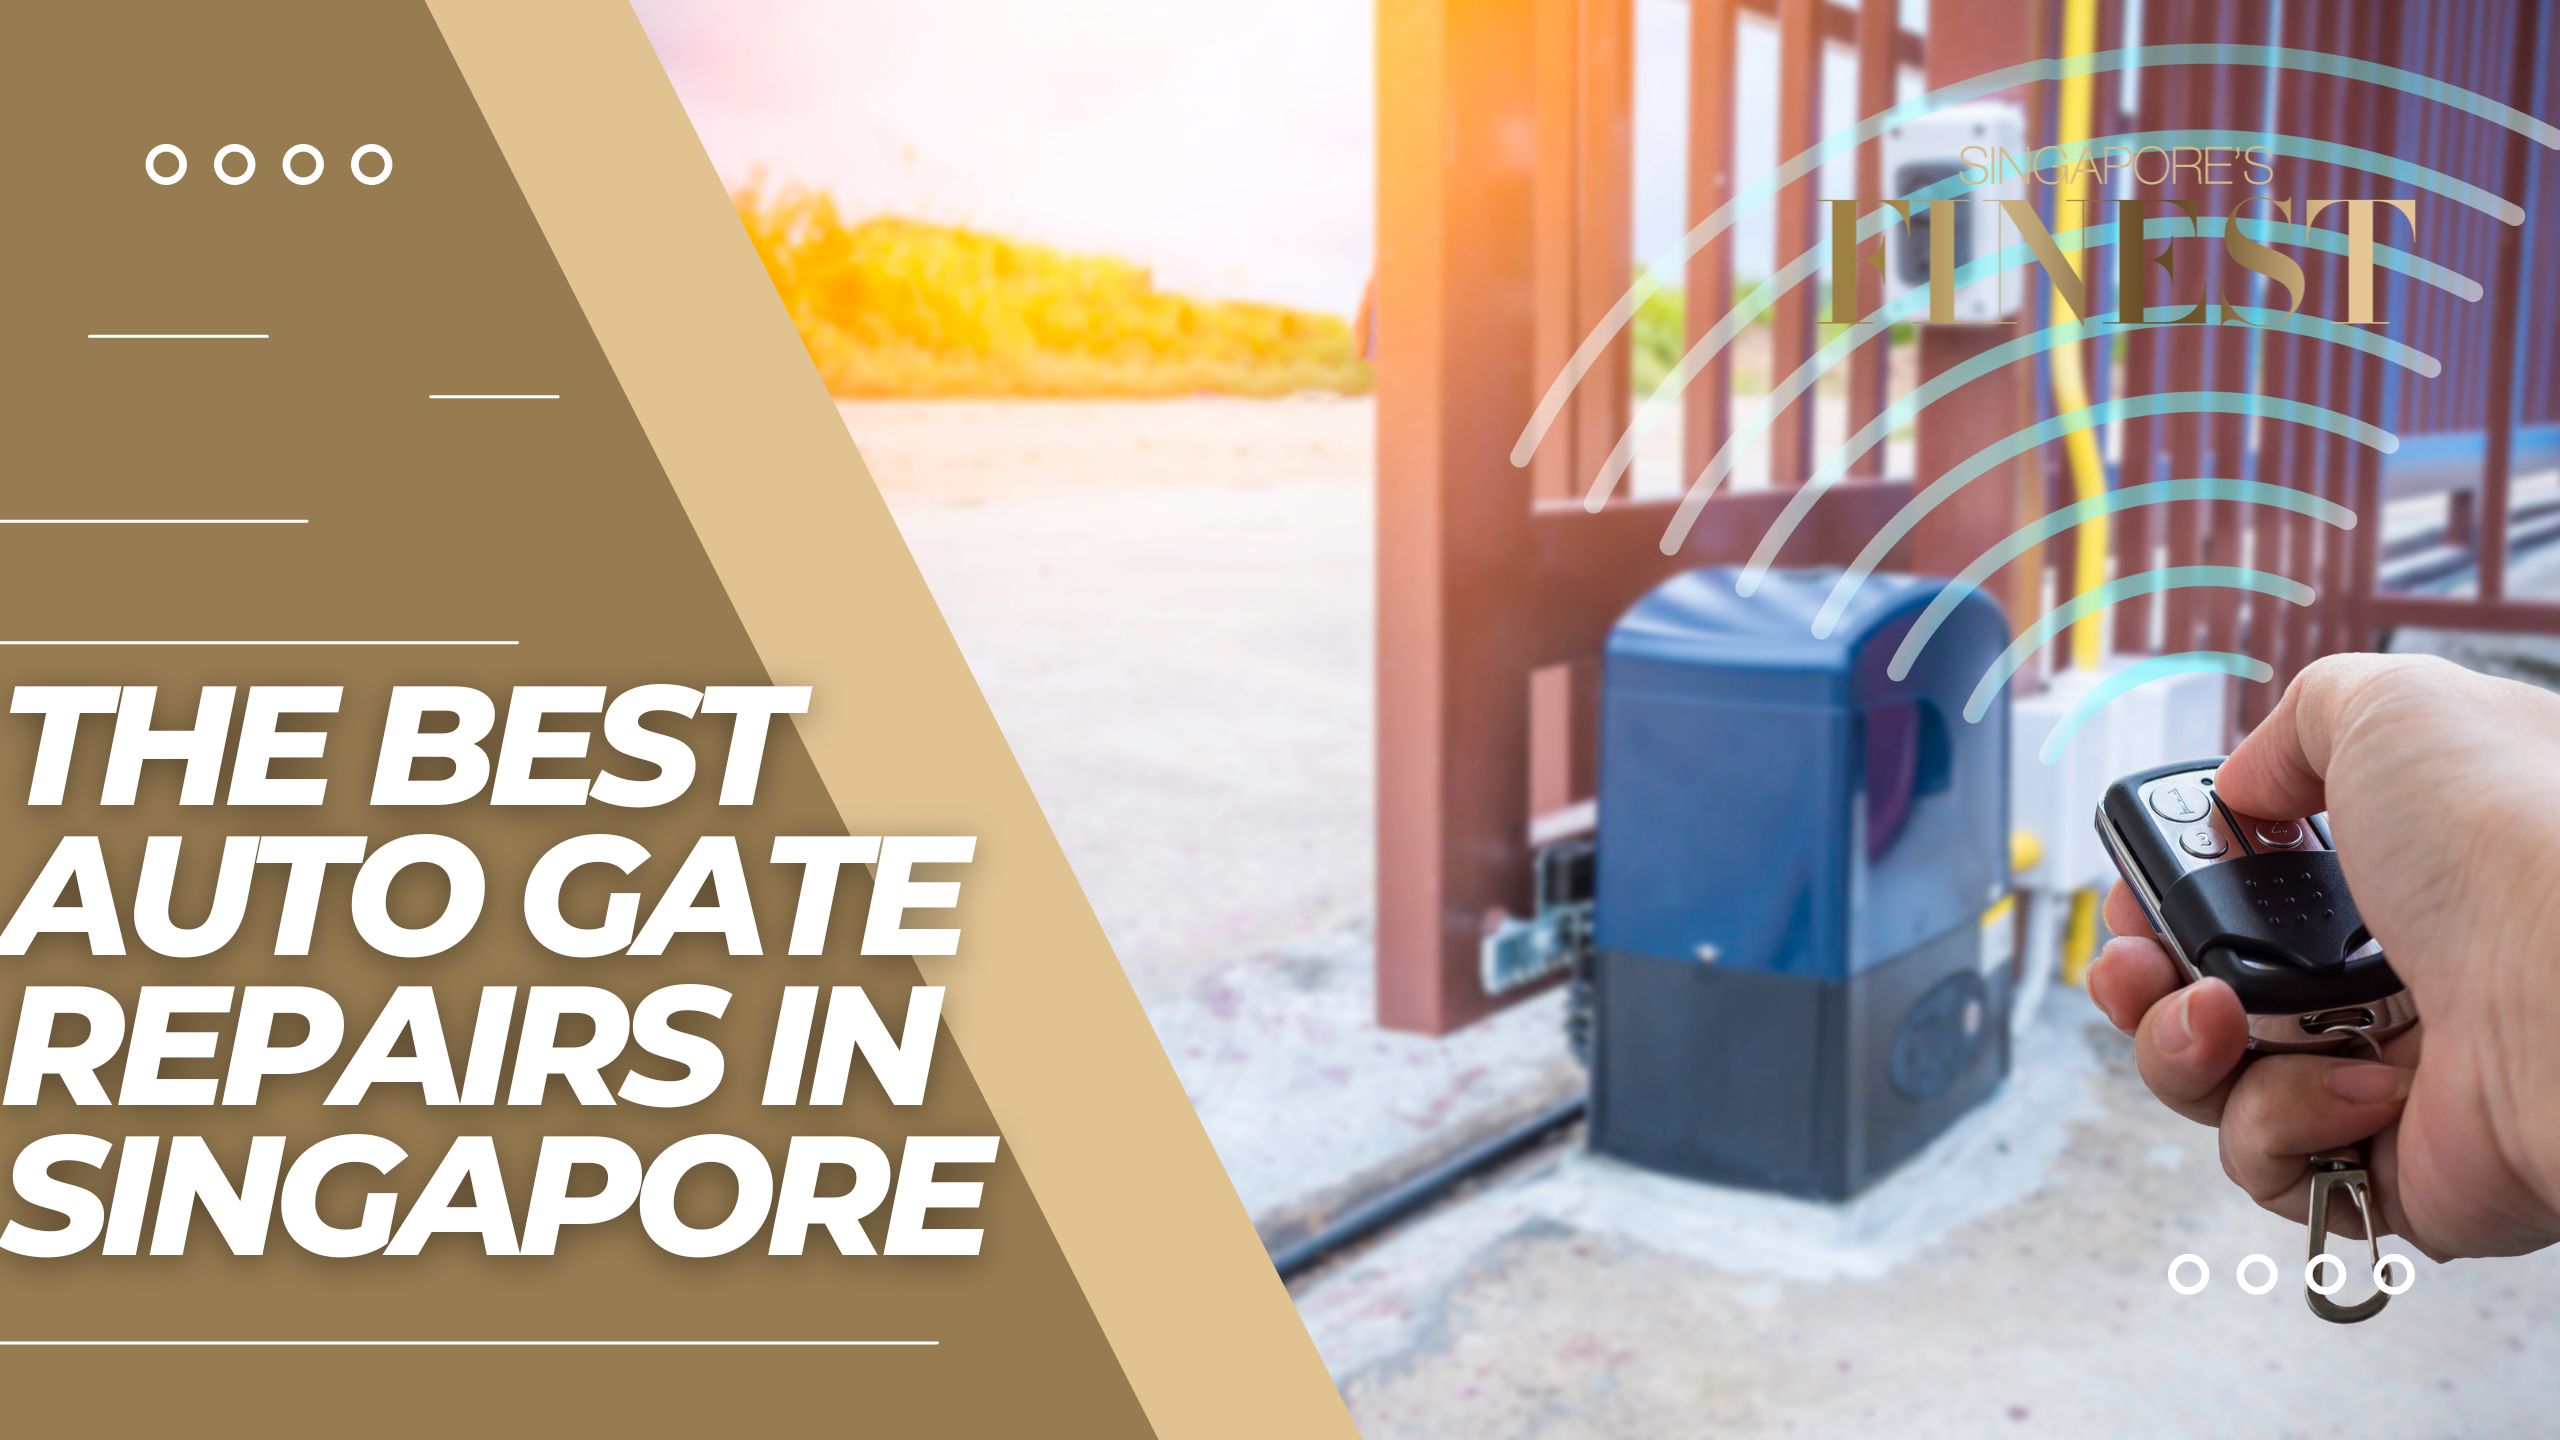 The Finest Auto Gate Repairs in Singapore